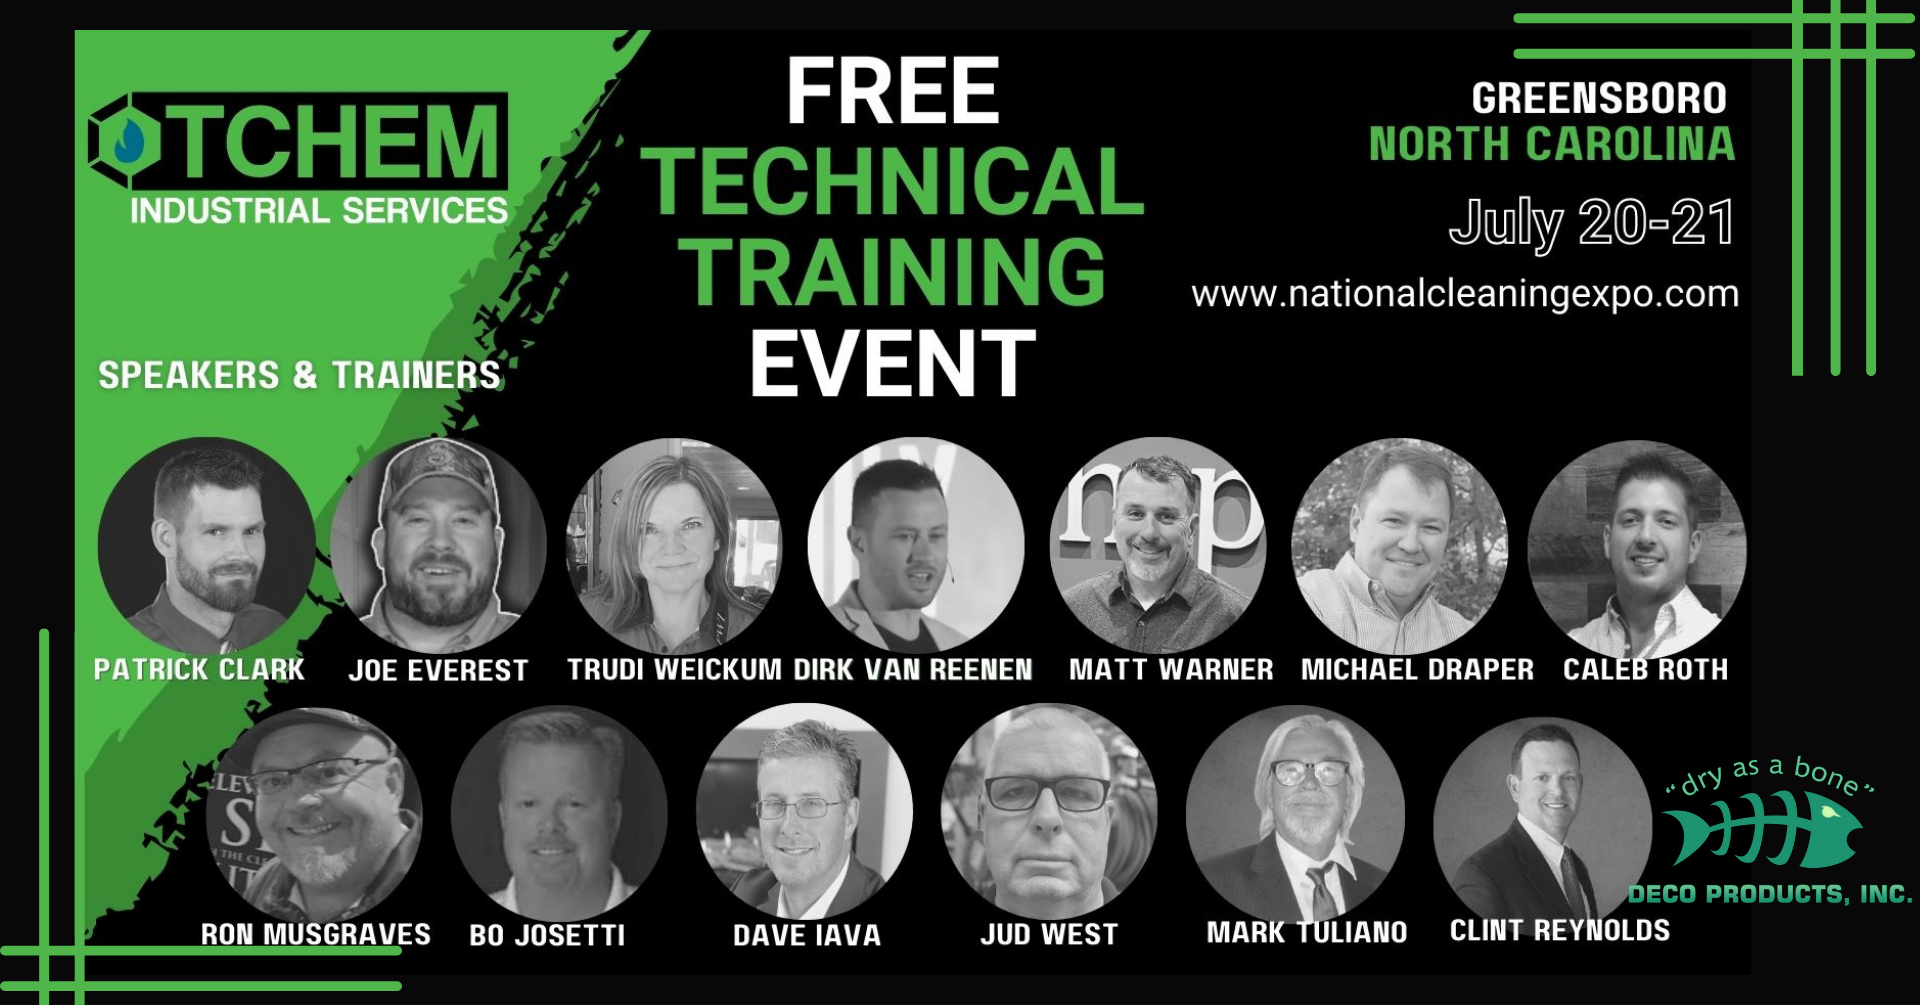 a flyer promoting a free technical training even in North Carolina